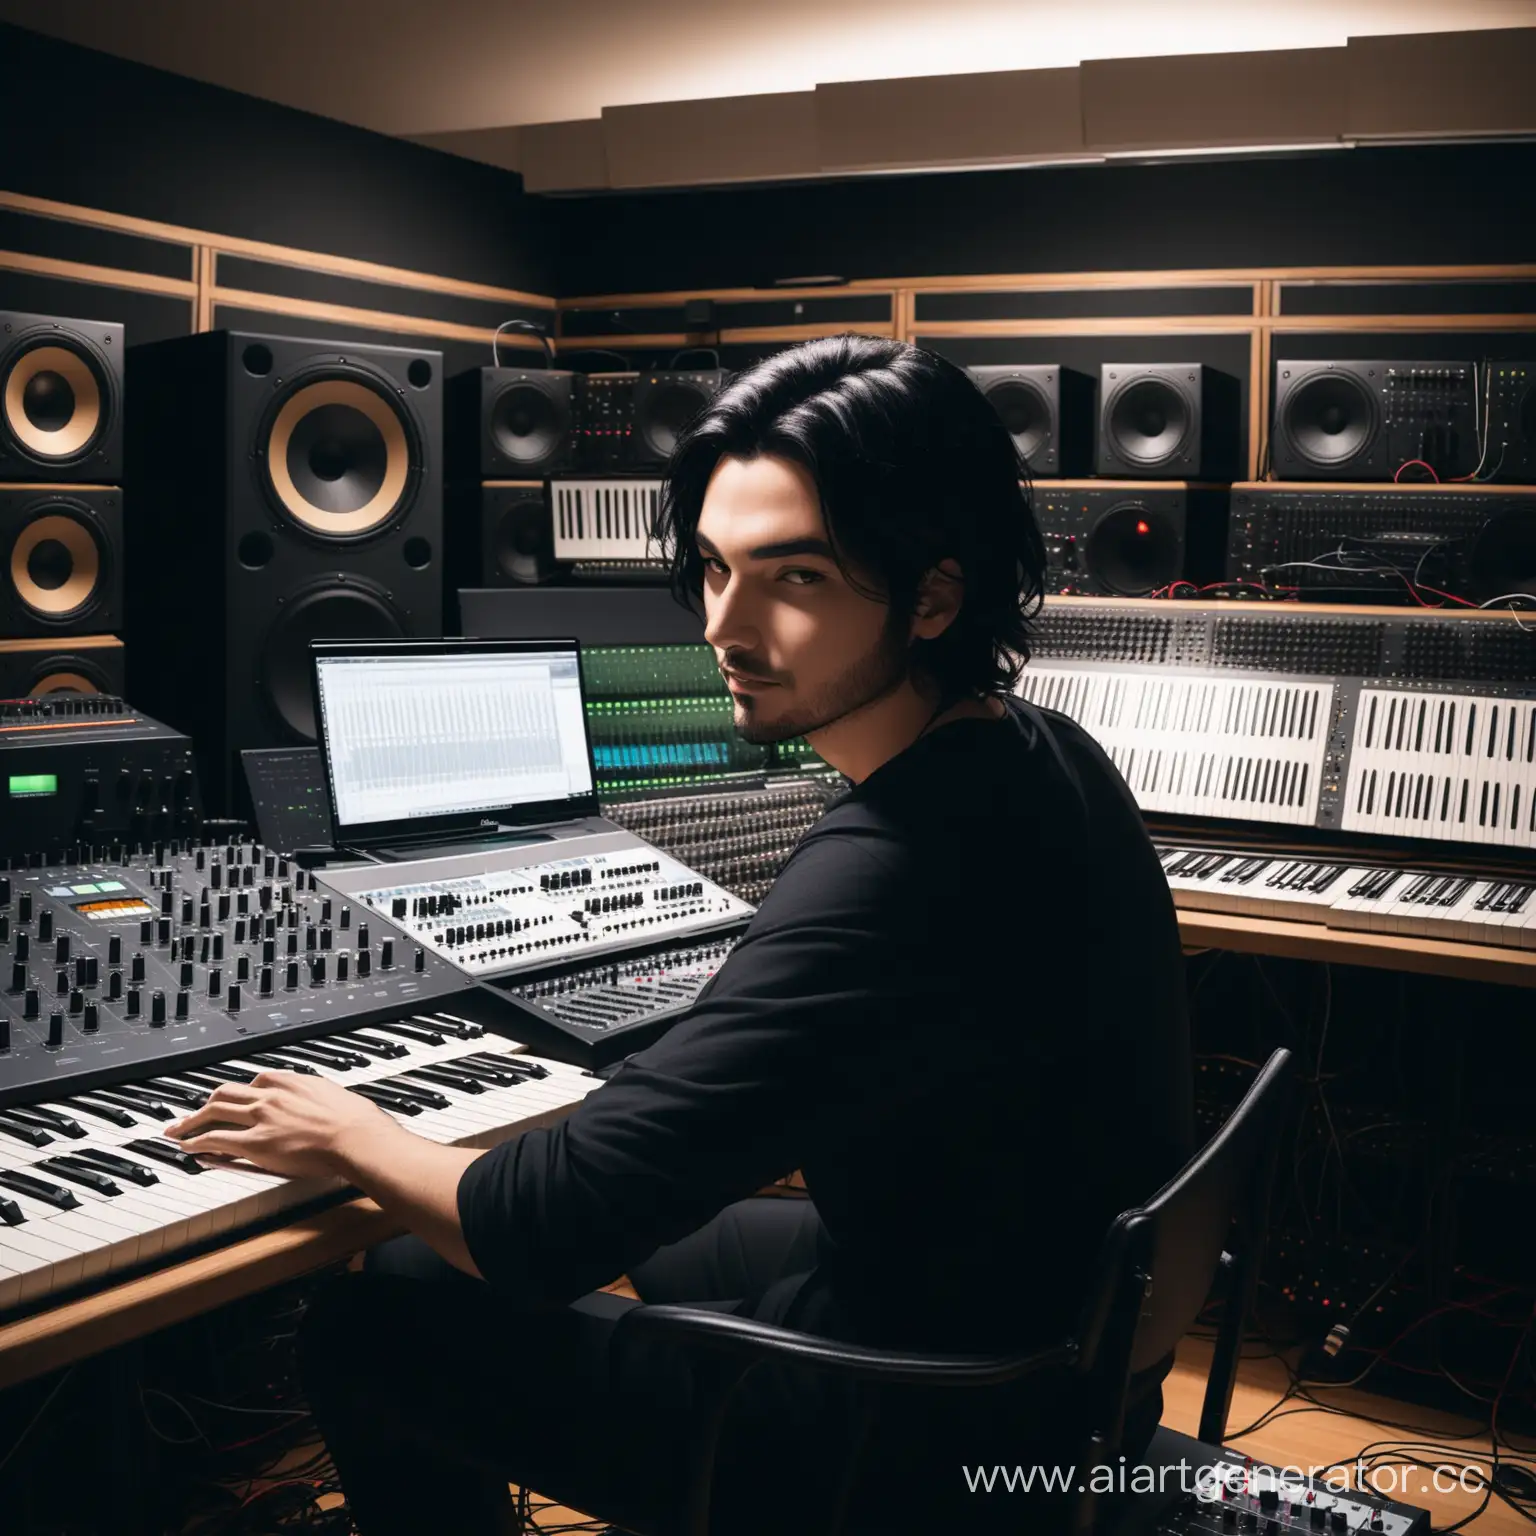 BlackHaired-Music-Producer-Surrounded-by-Synthesizers-in-Studio